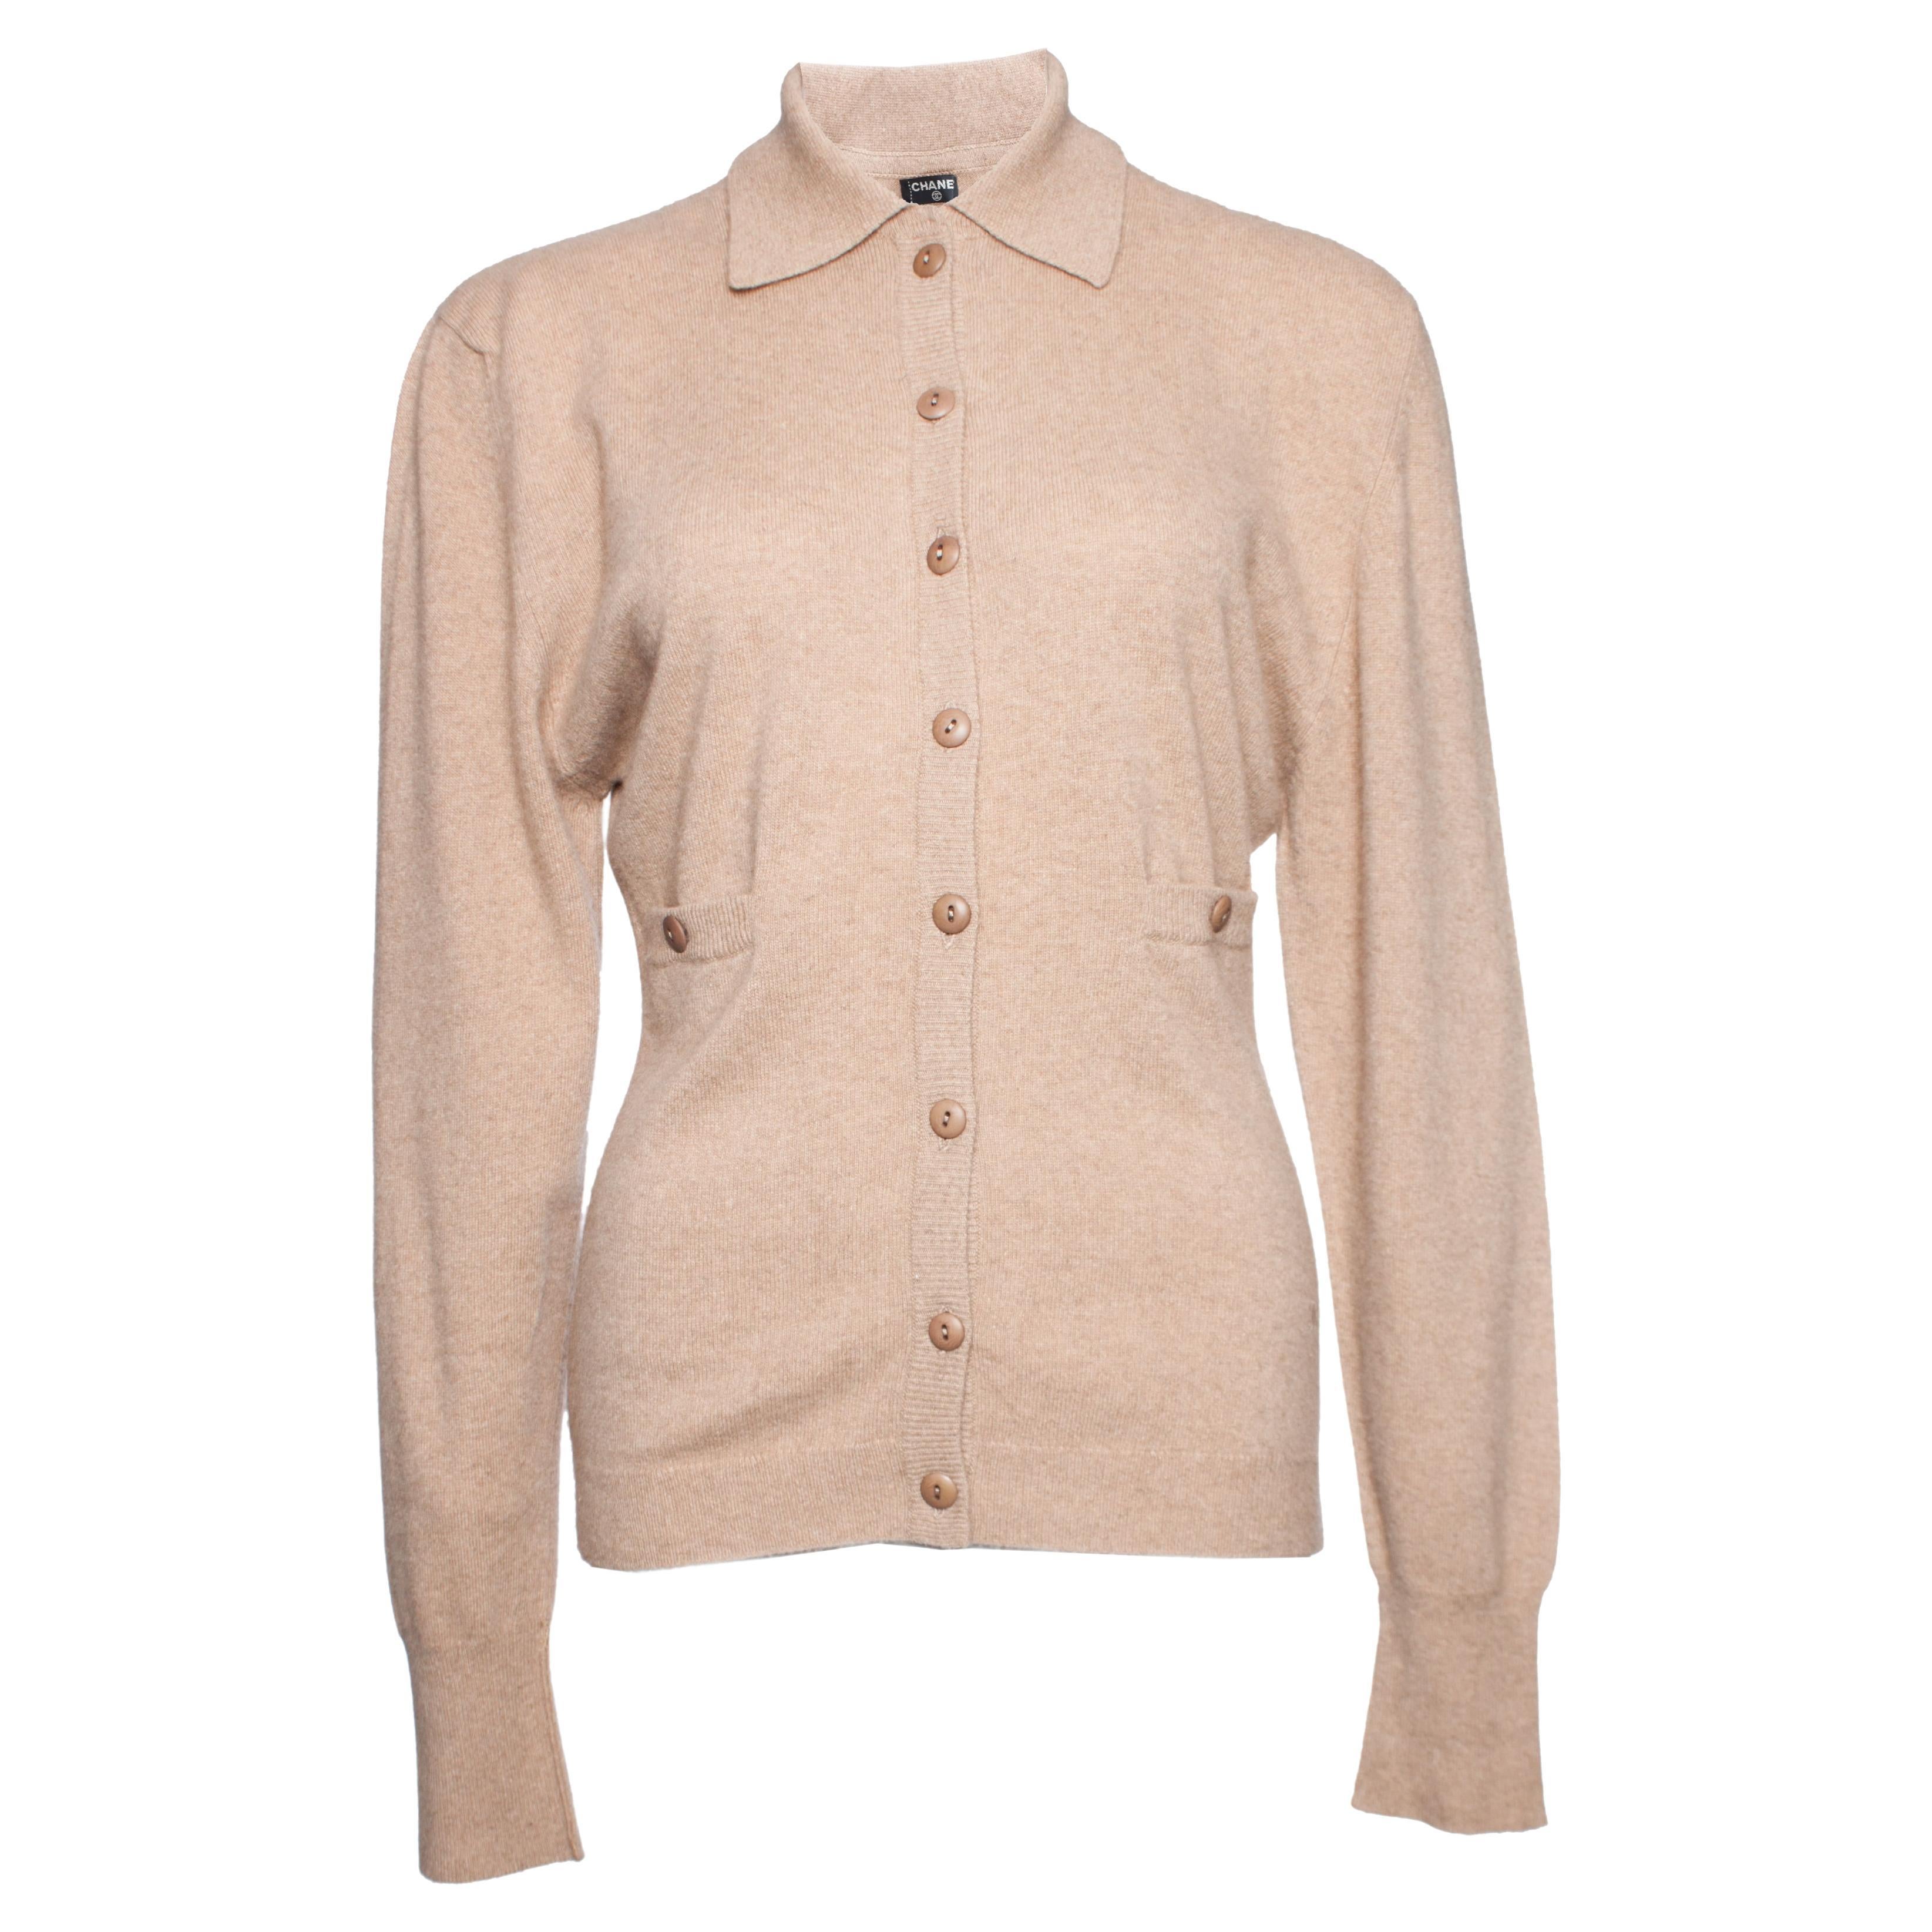 Chanel, camel cashmere cardigan. For Sale